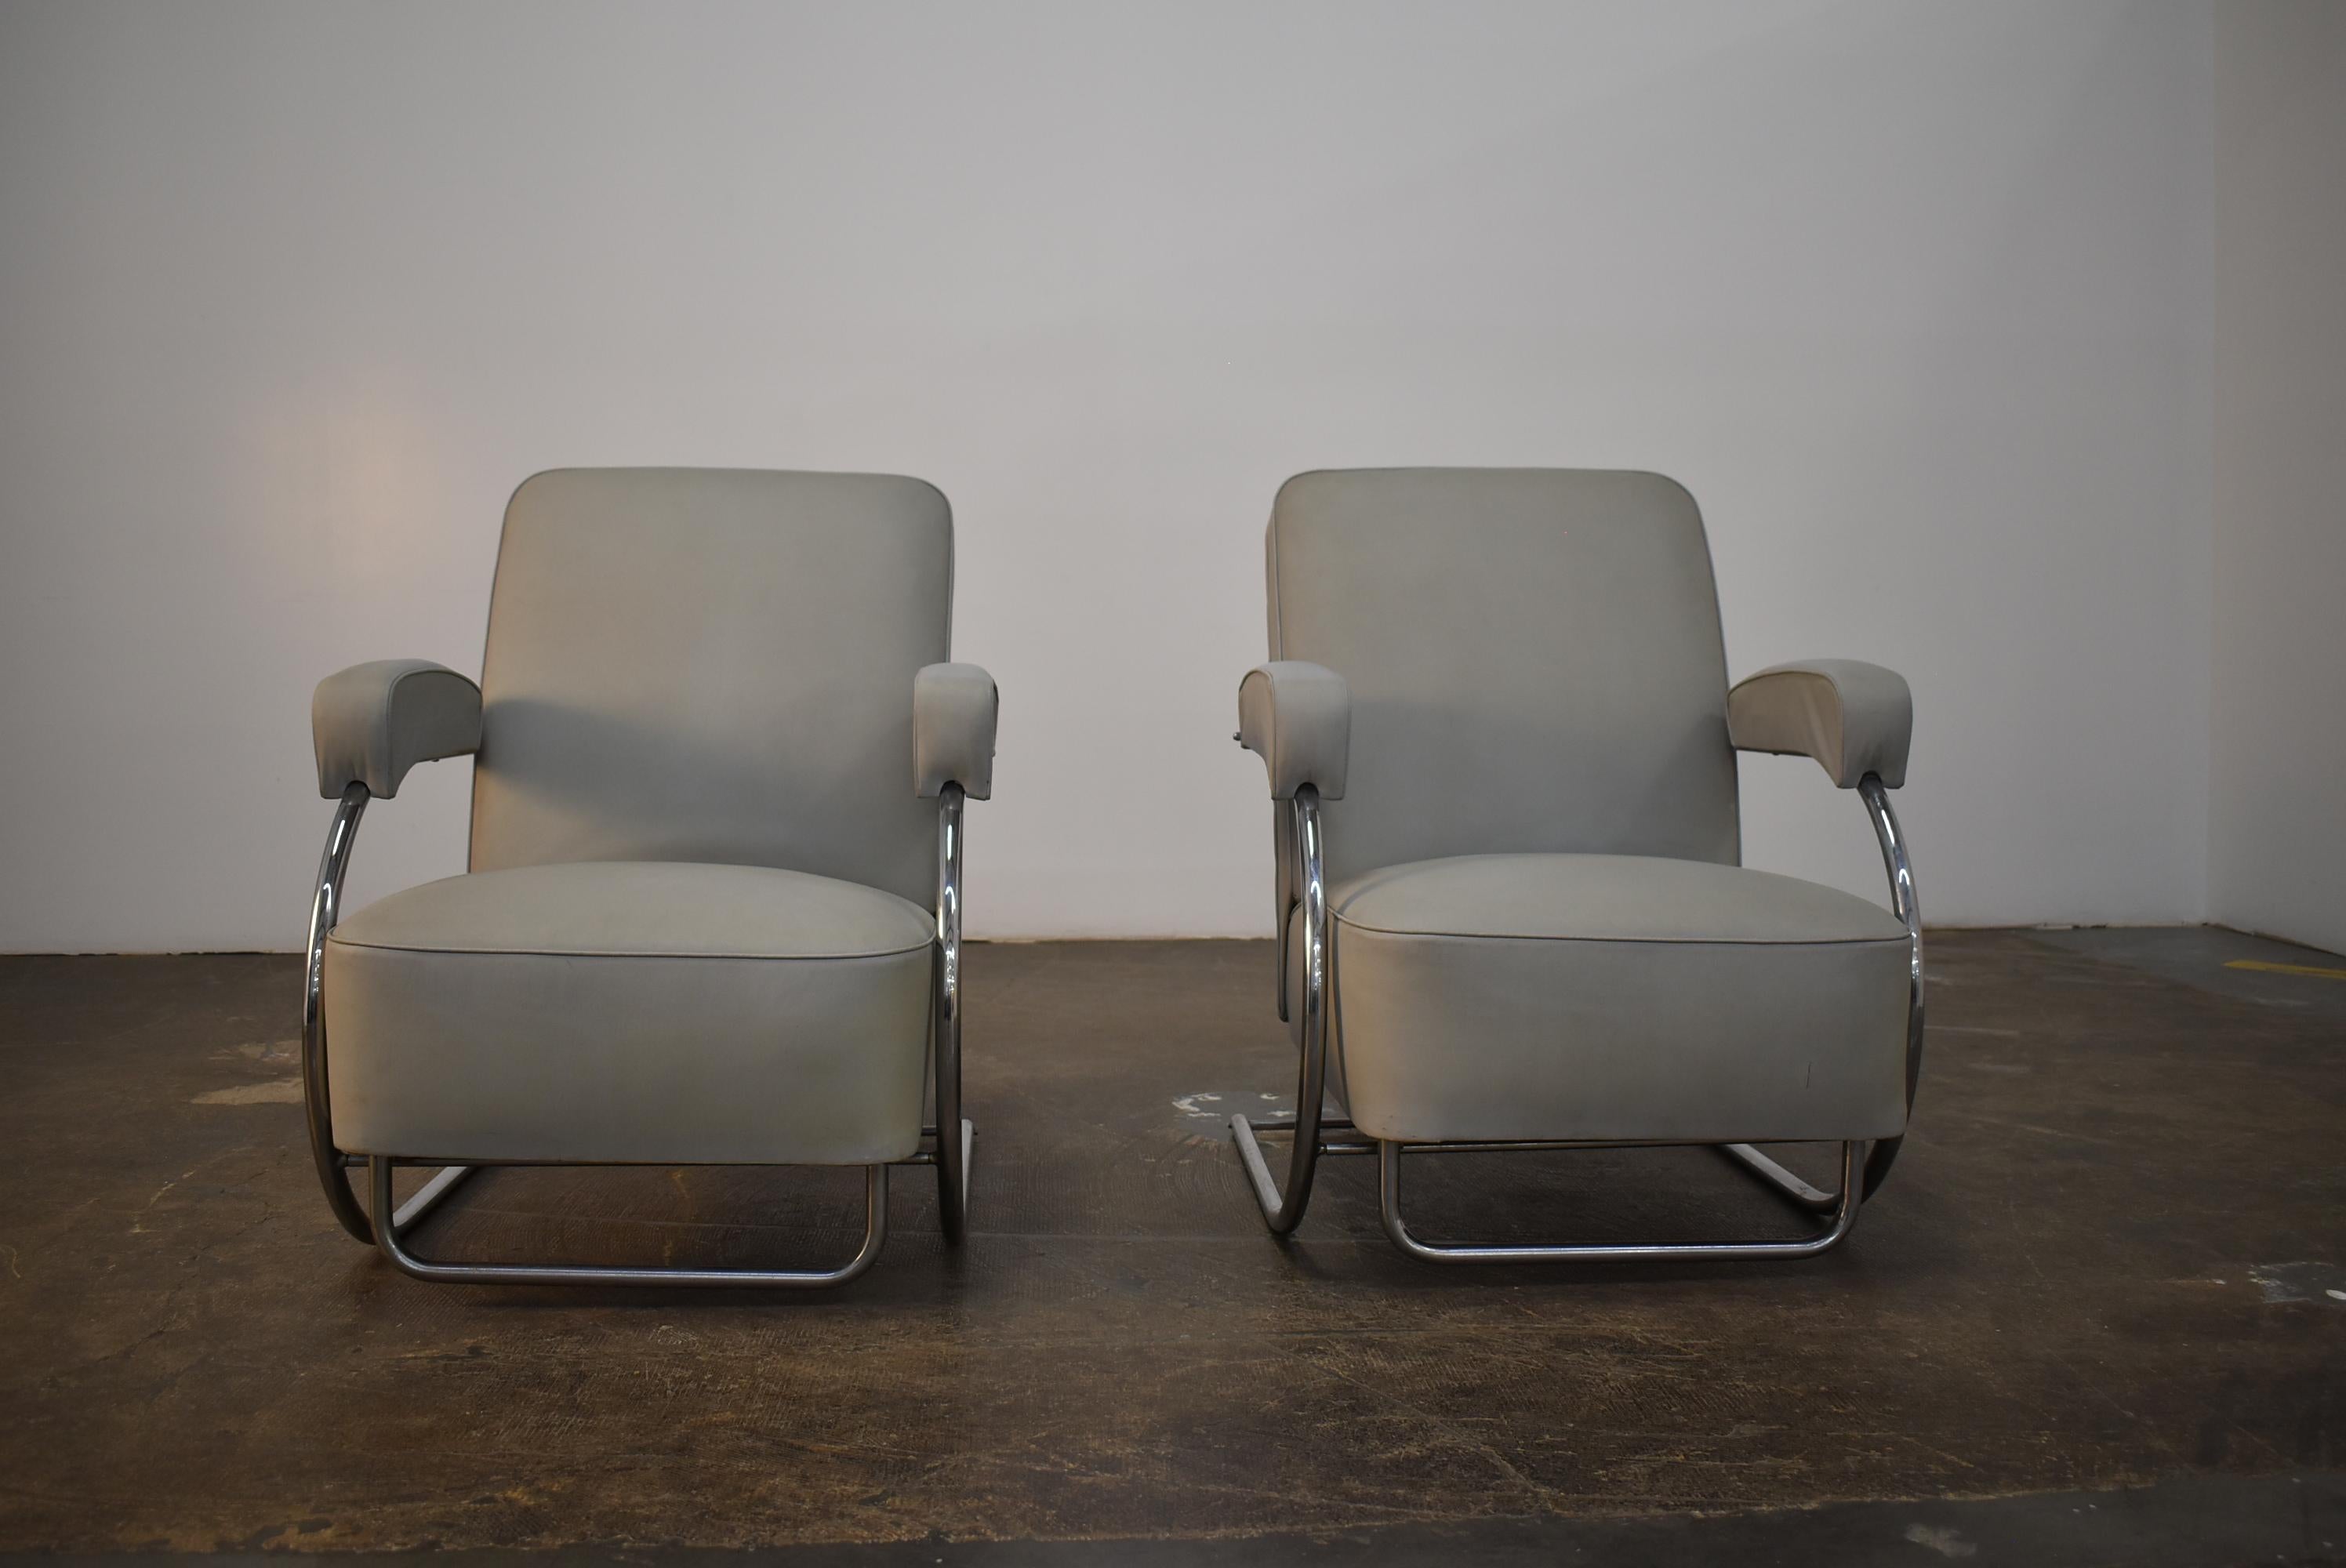 Set of two (x2) rare 1930s French Art Deco Reclining Lounge Chairs!

These chairs were hand crafted in France in the 1930s.  The chairs are 100% original, and have never been reupholstered.  The inner suspension and horsehair have never been